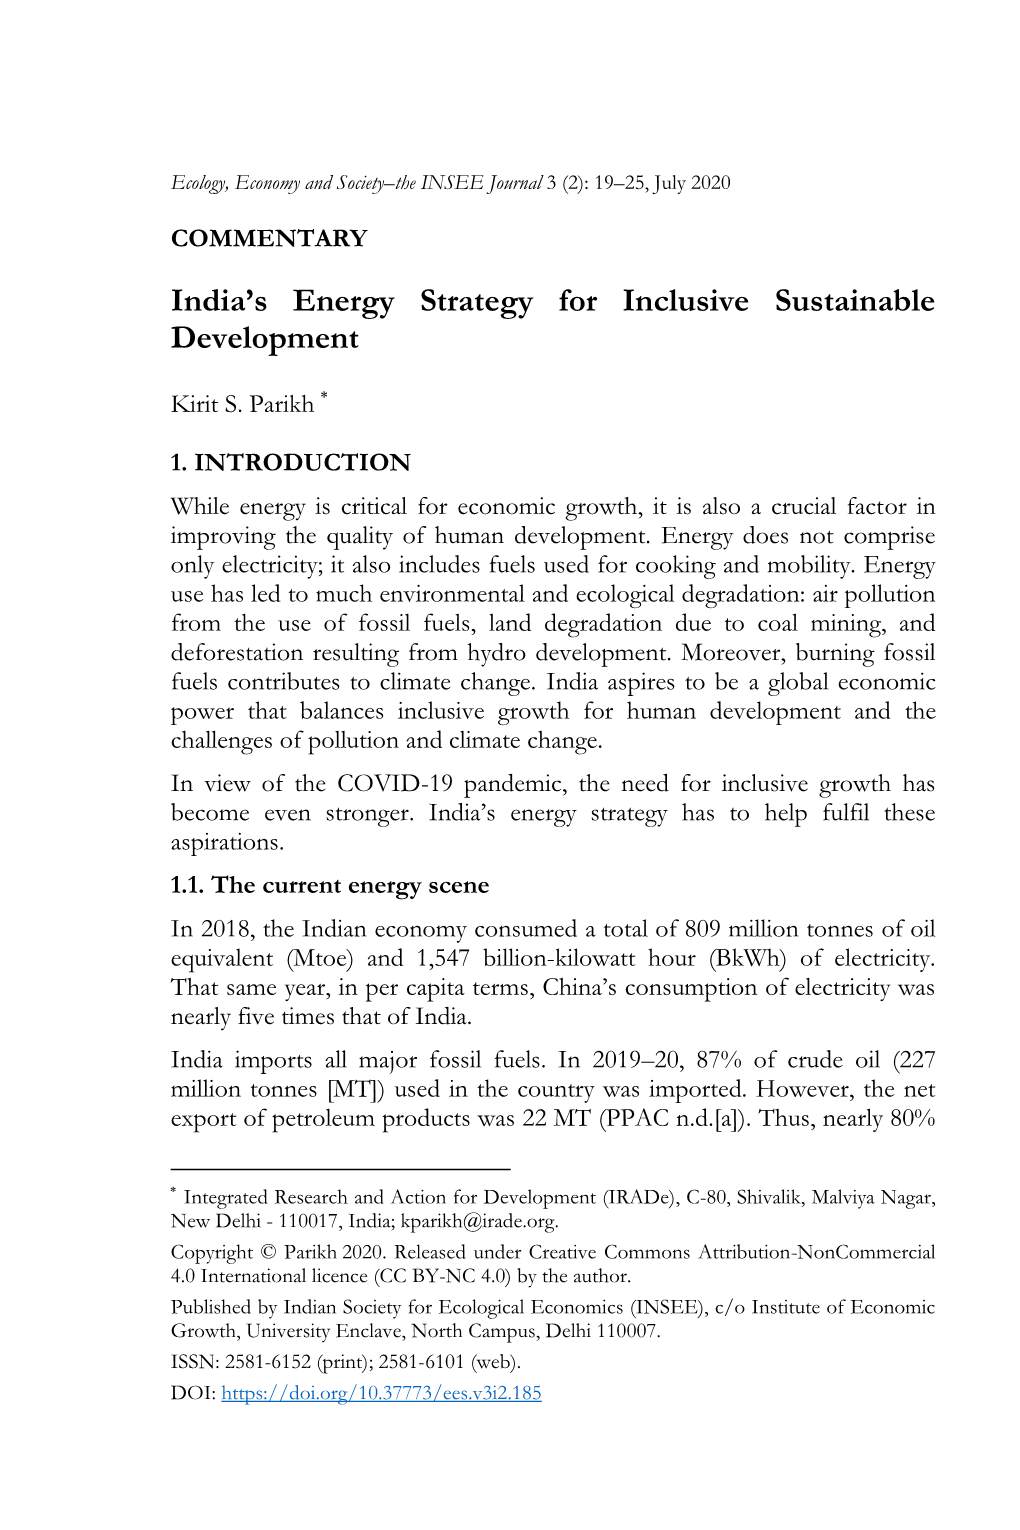 India's Energy Strategy for Inclusive Sustainable Development